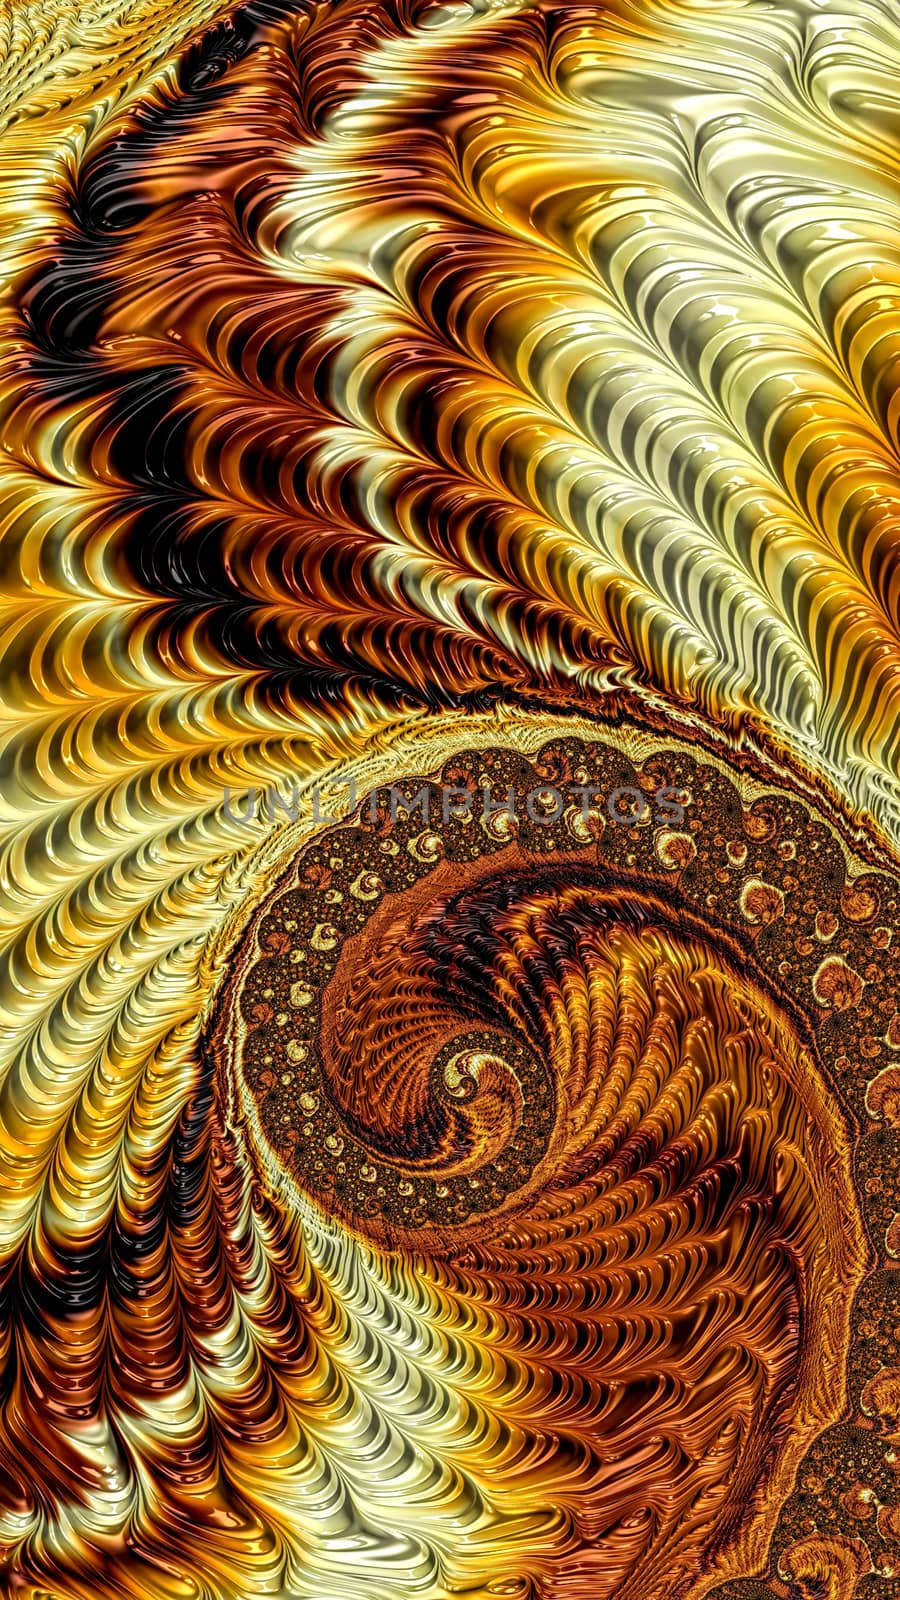 Fractal spiral background - abstract computer-generated image. Digital art: glossy precious helix and waves. Vertical composition. For desktop wallpaper, banners.